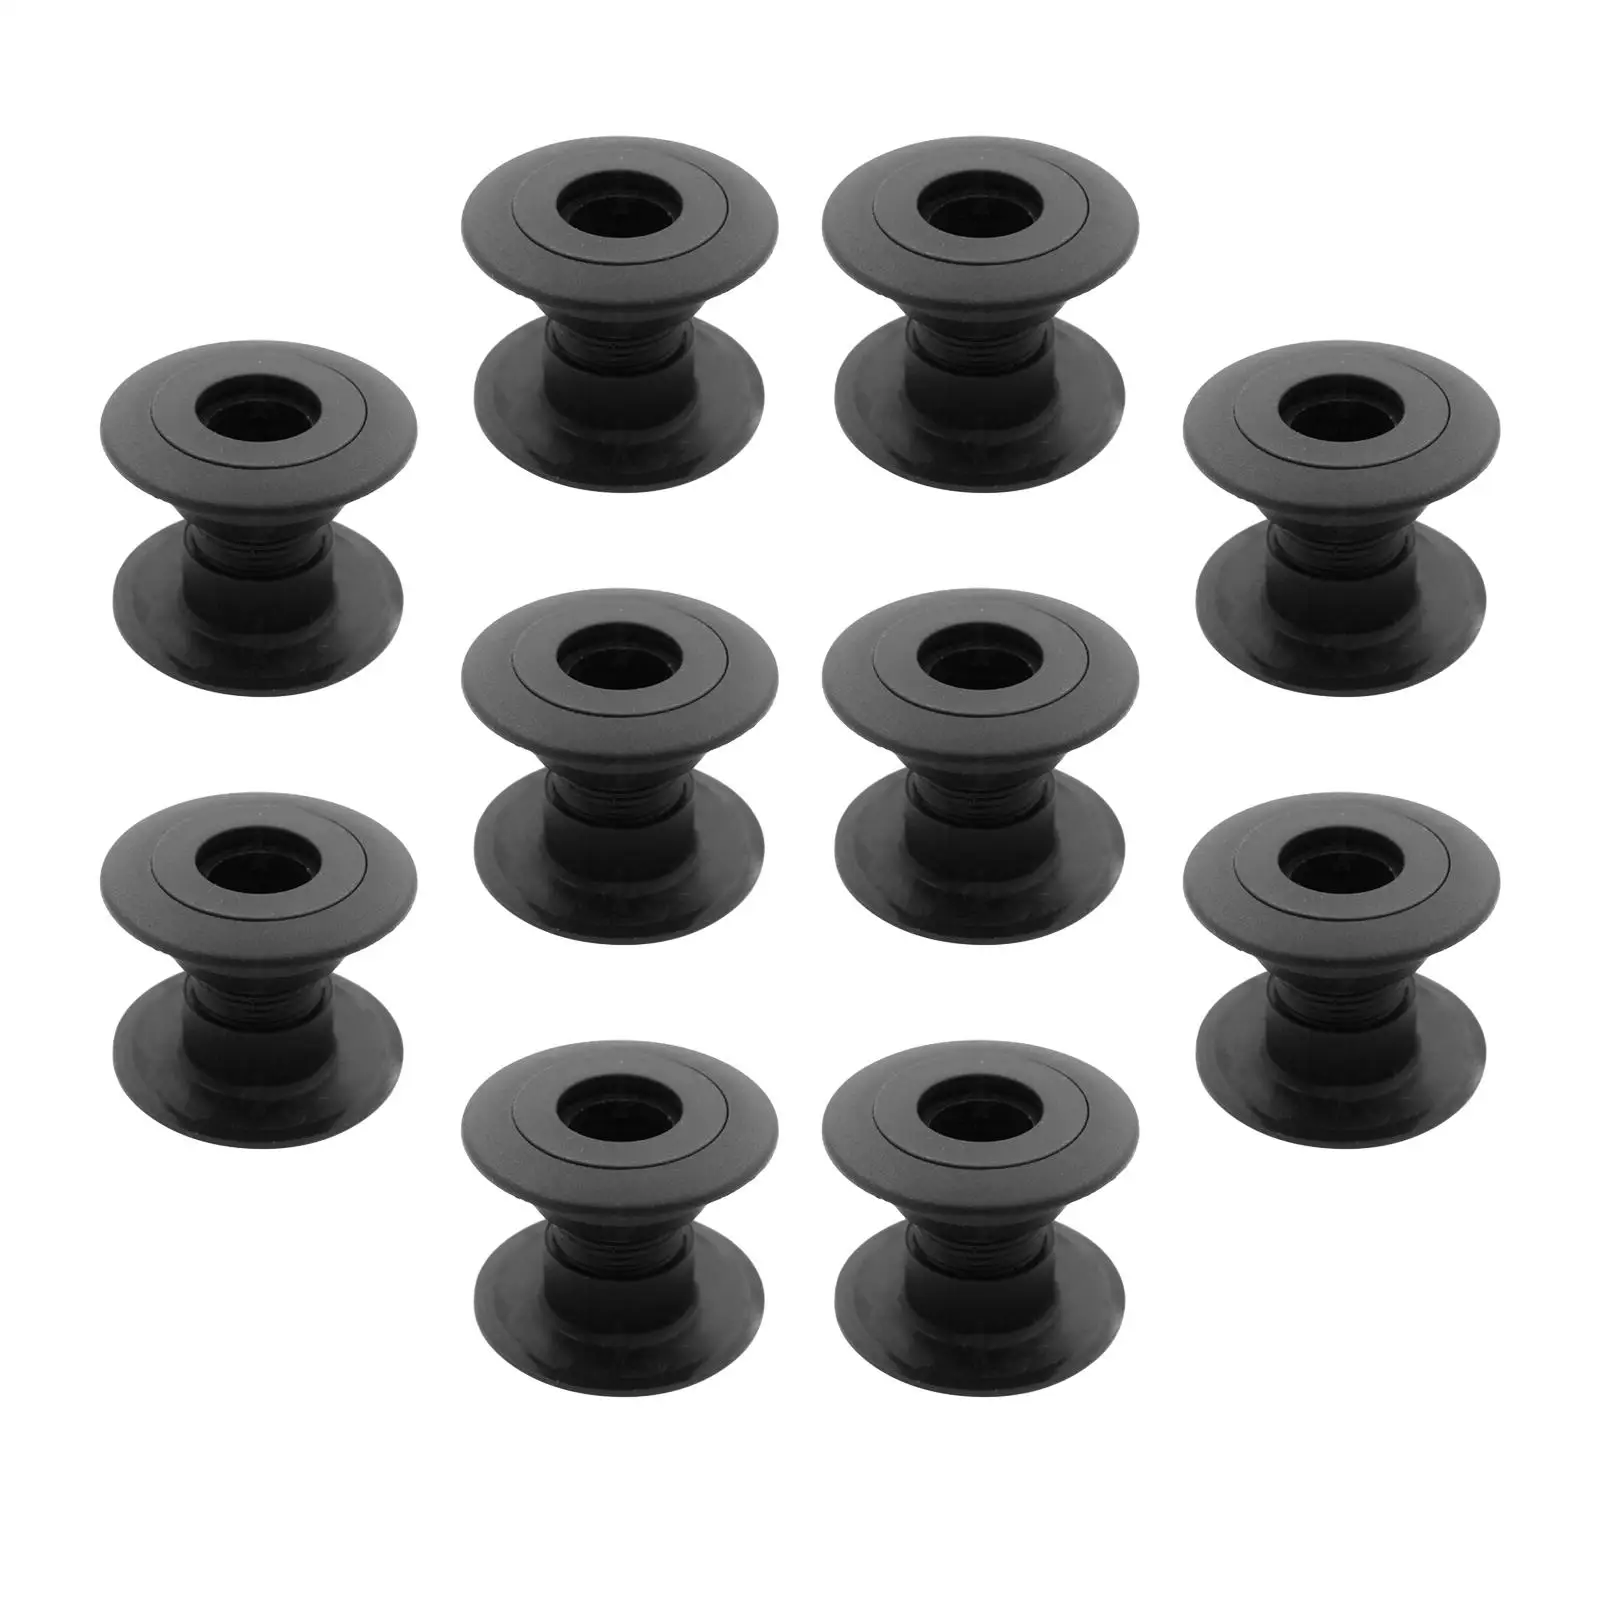 Table Football Bearing Rods Durable Foosball Bushings Soccer Games Replacement